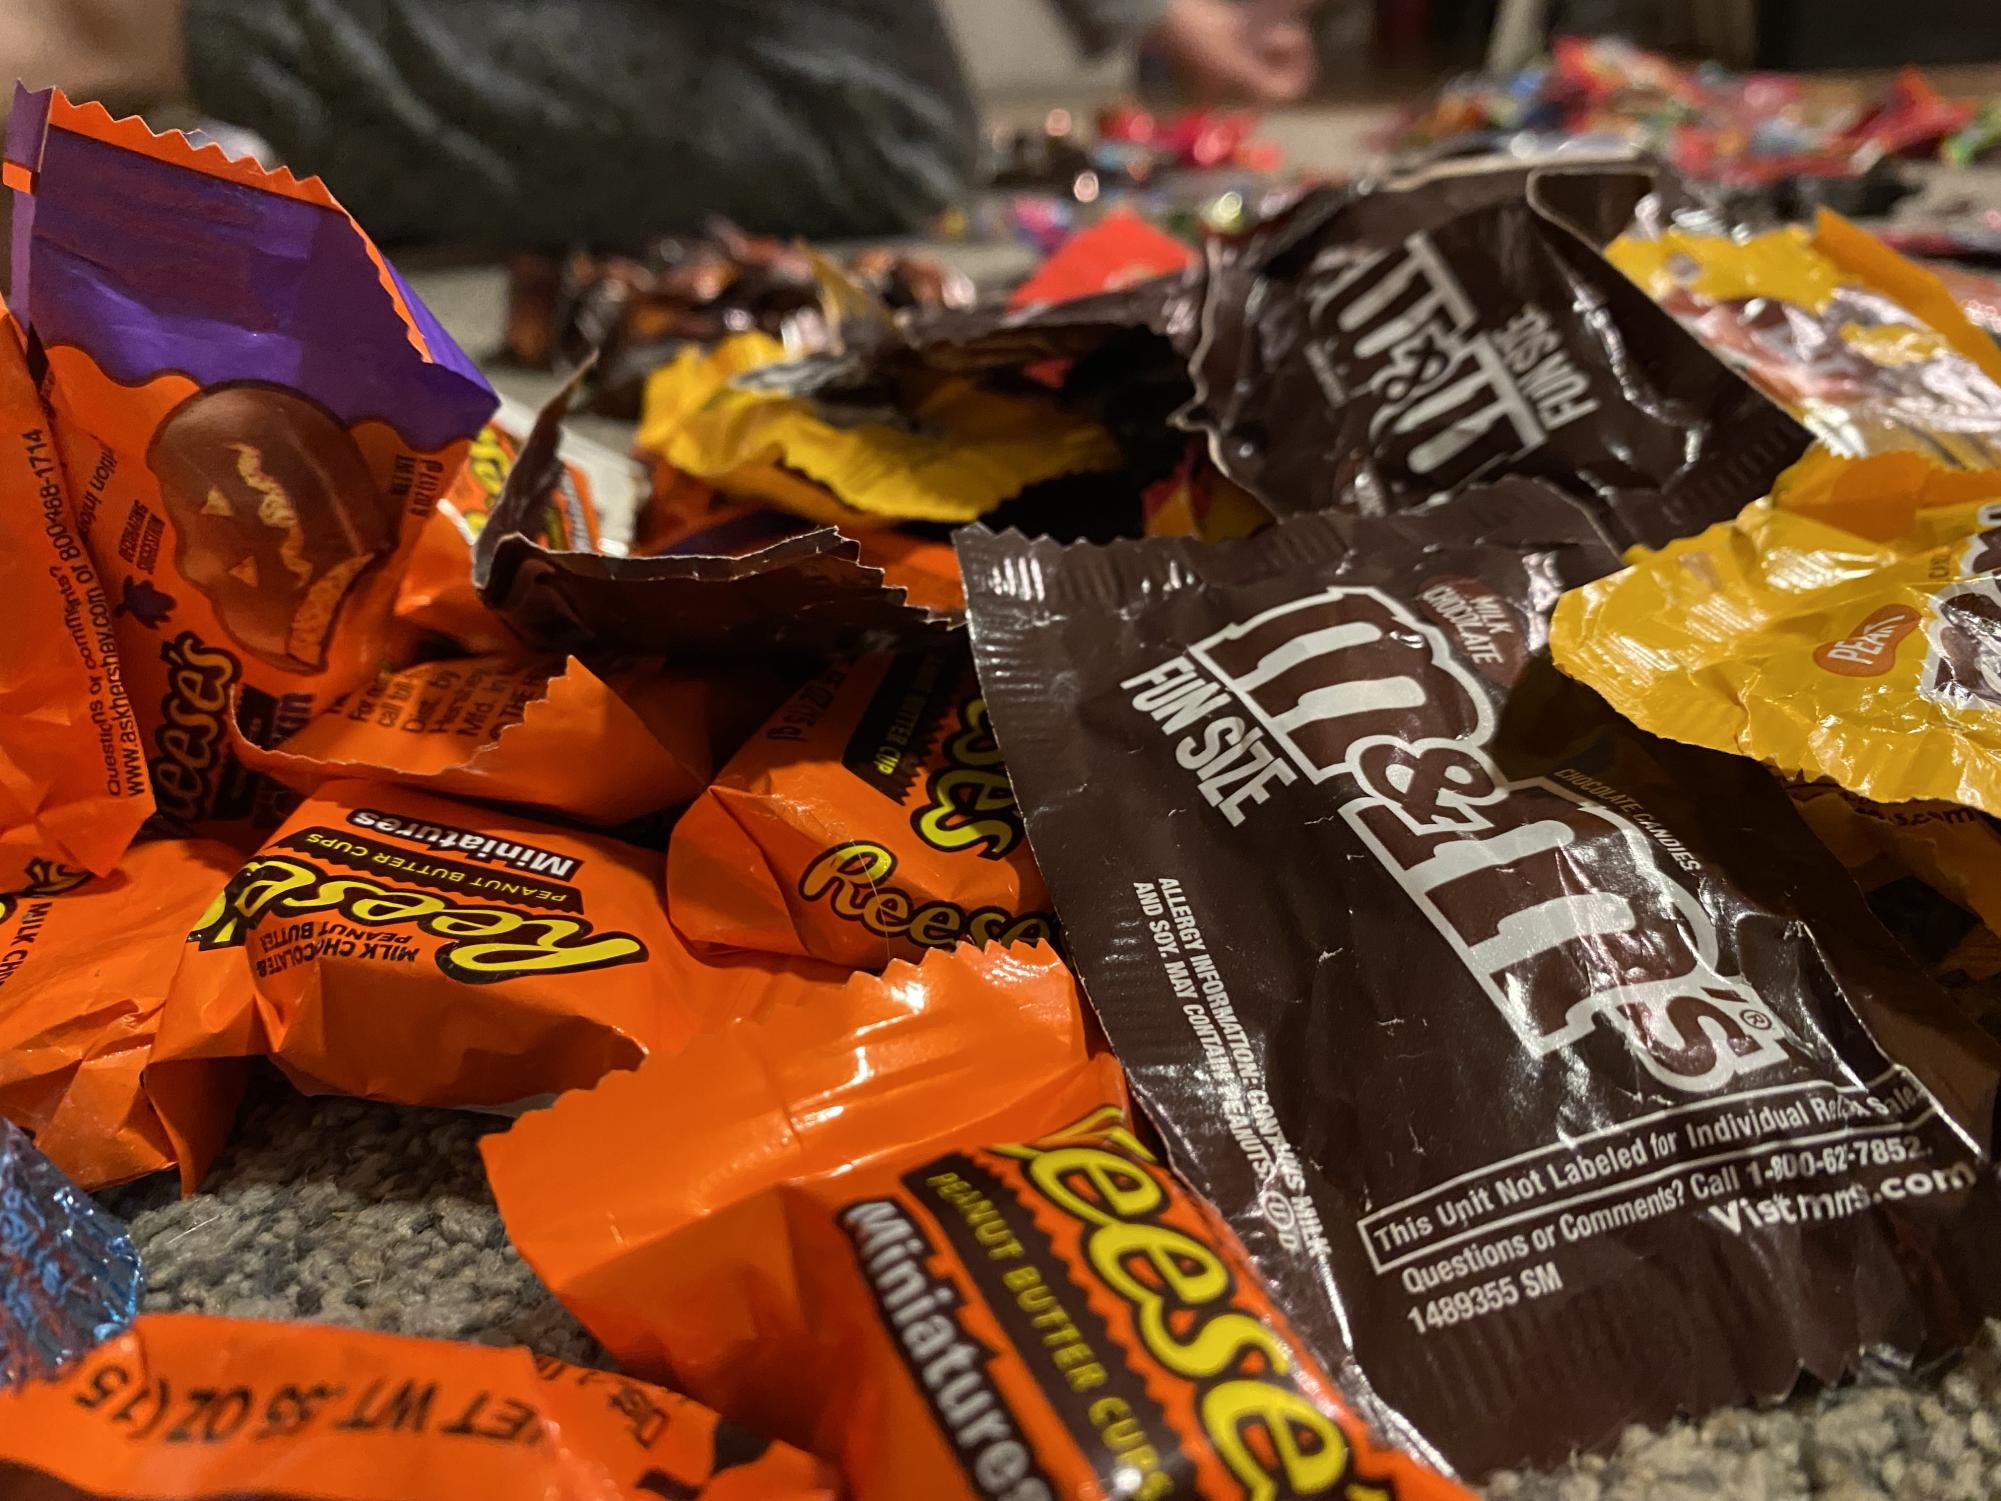 Beloved Halloween candies laying in a pile.